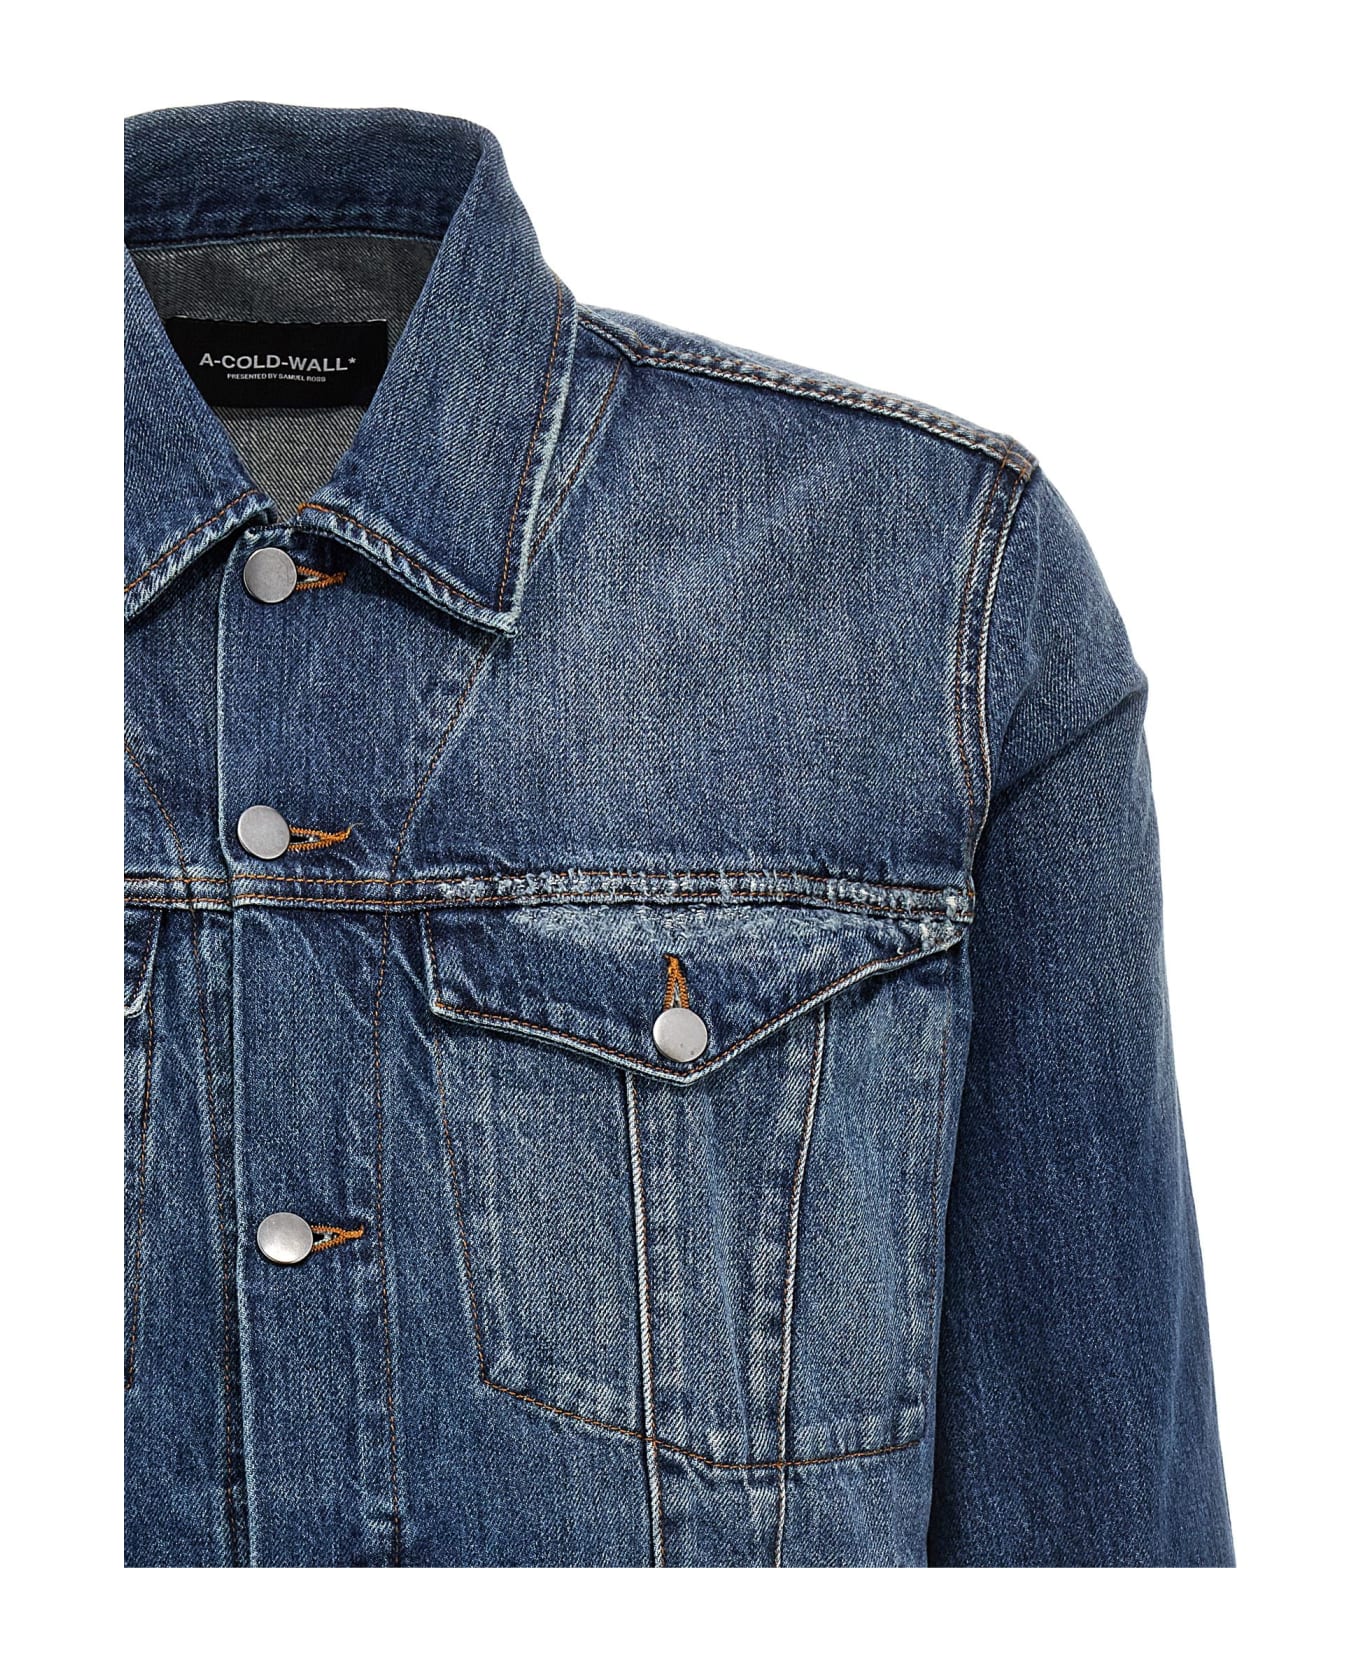 A-COLD-WALL 'foundry Selvedge' Jacket - Blue